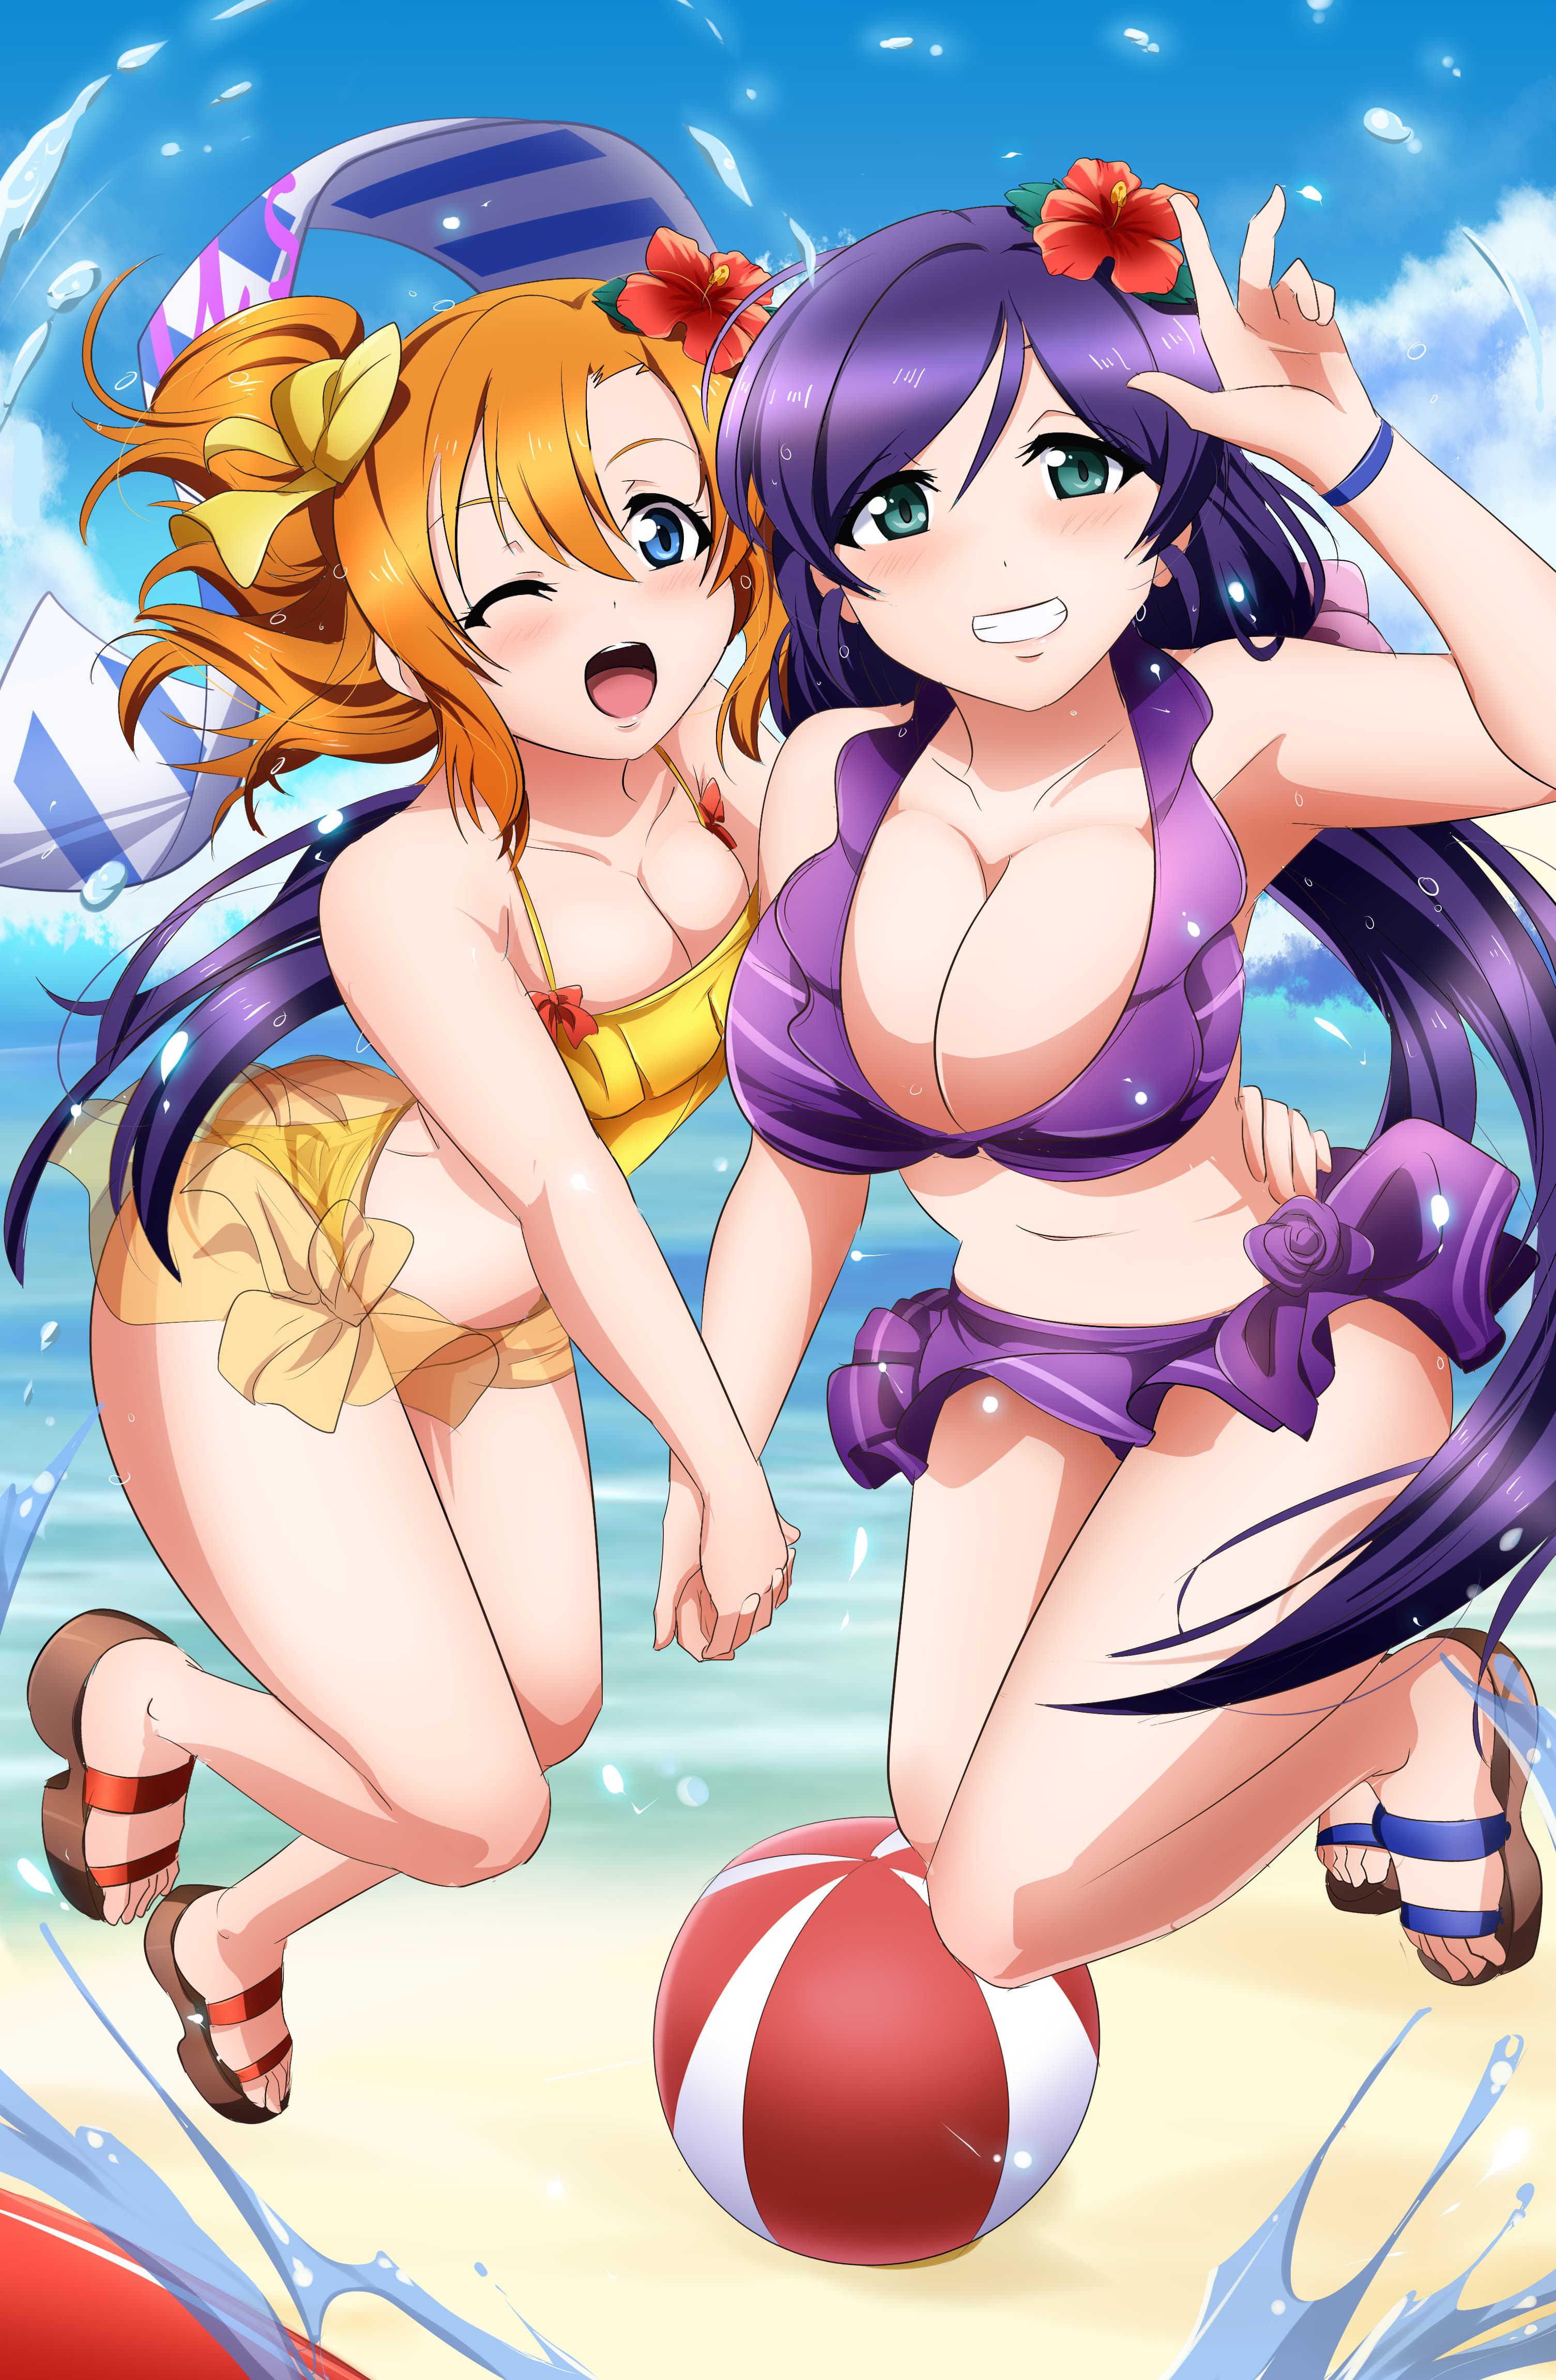 【Love Live】 Μ's (Muse) Member's Carefully Selected Erotic Images Total 191st Bullet 25